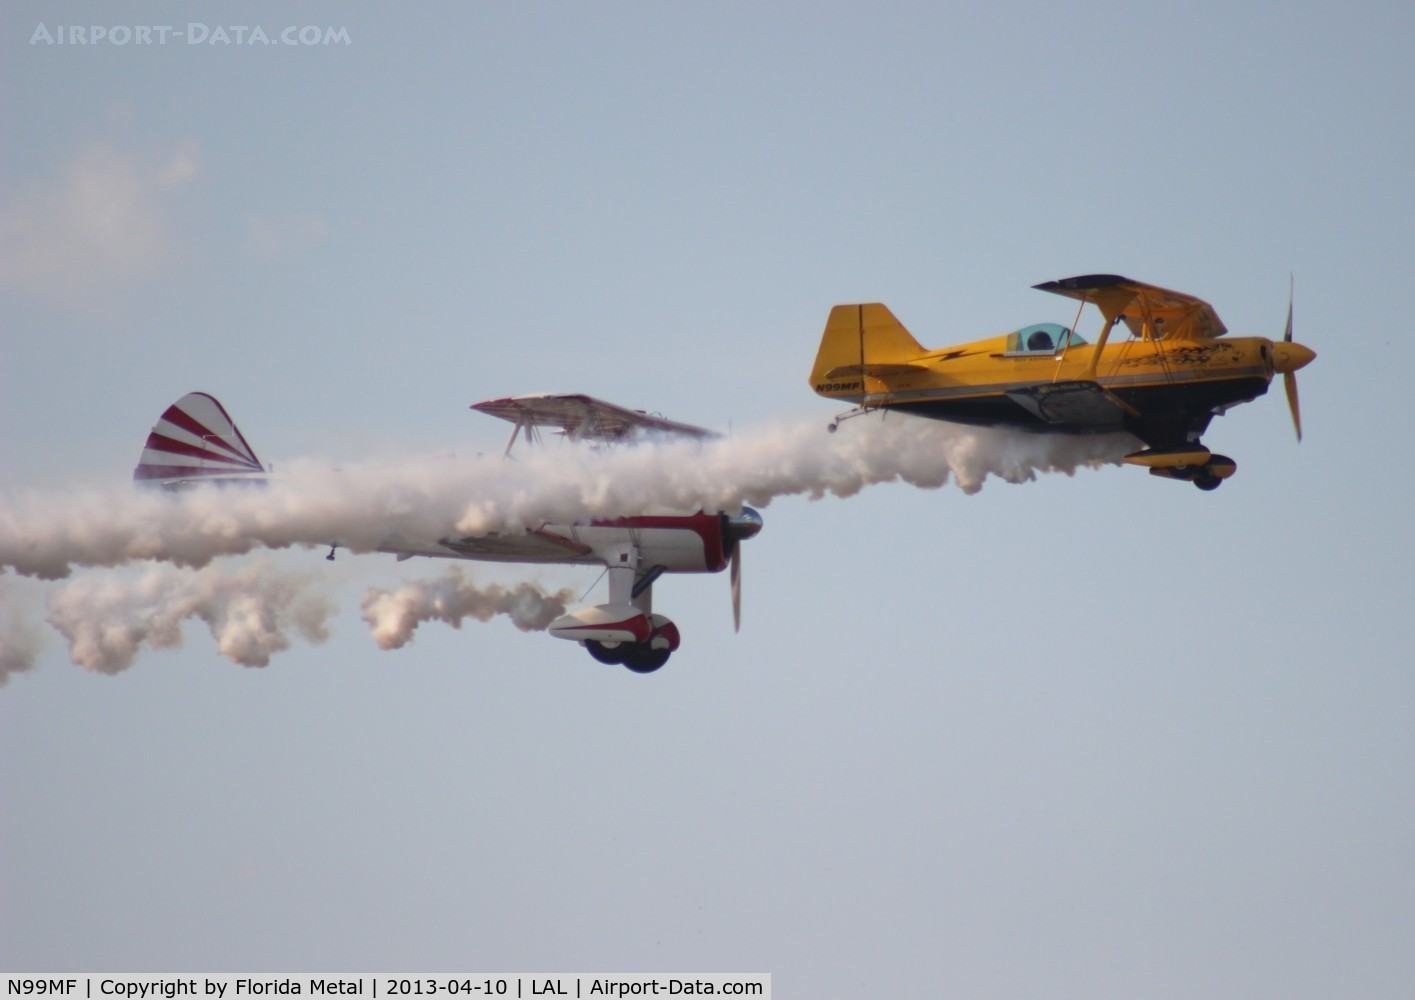 N99MF, 1982 Pitts S-2S Special C/N 3004, Pitts S-2S